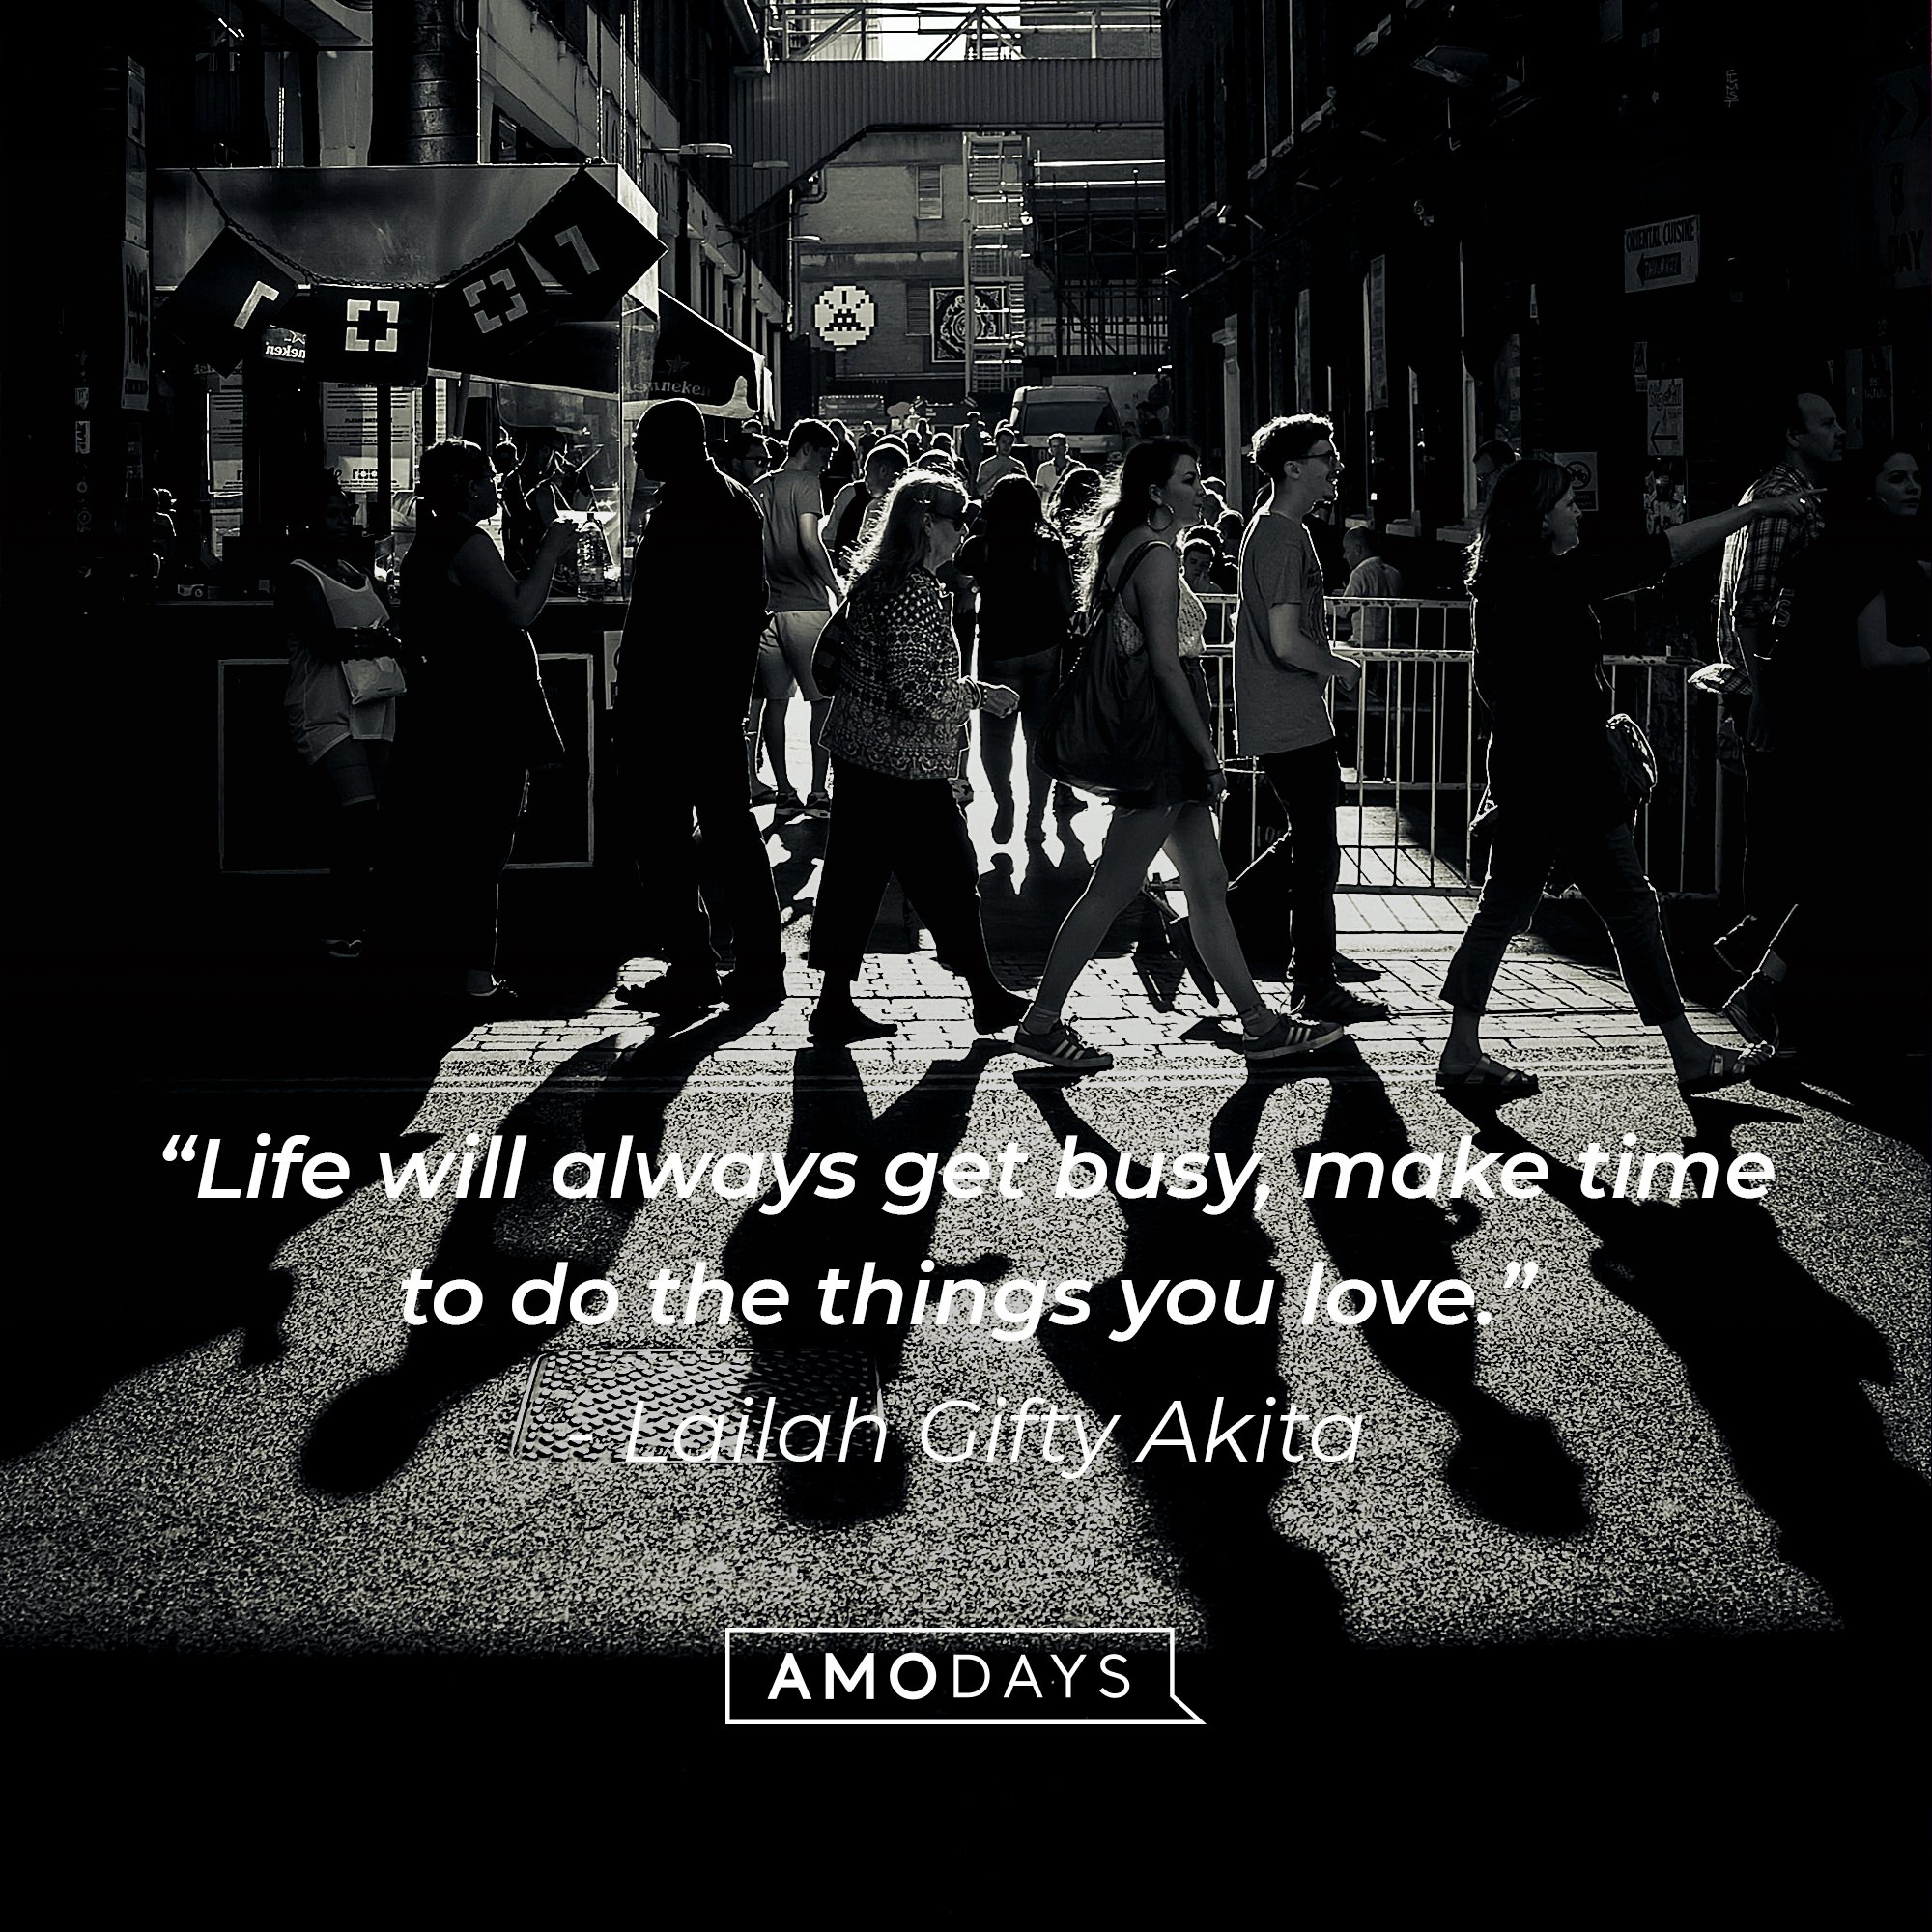  Lailah Gifty Akita's quote: “Life will always get busy, make time to do the things you love.” | Image: AmoDays